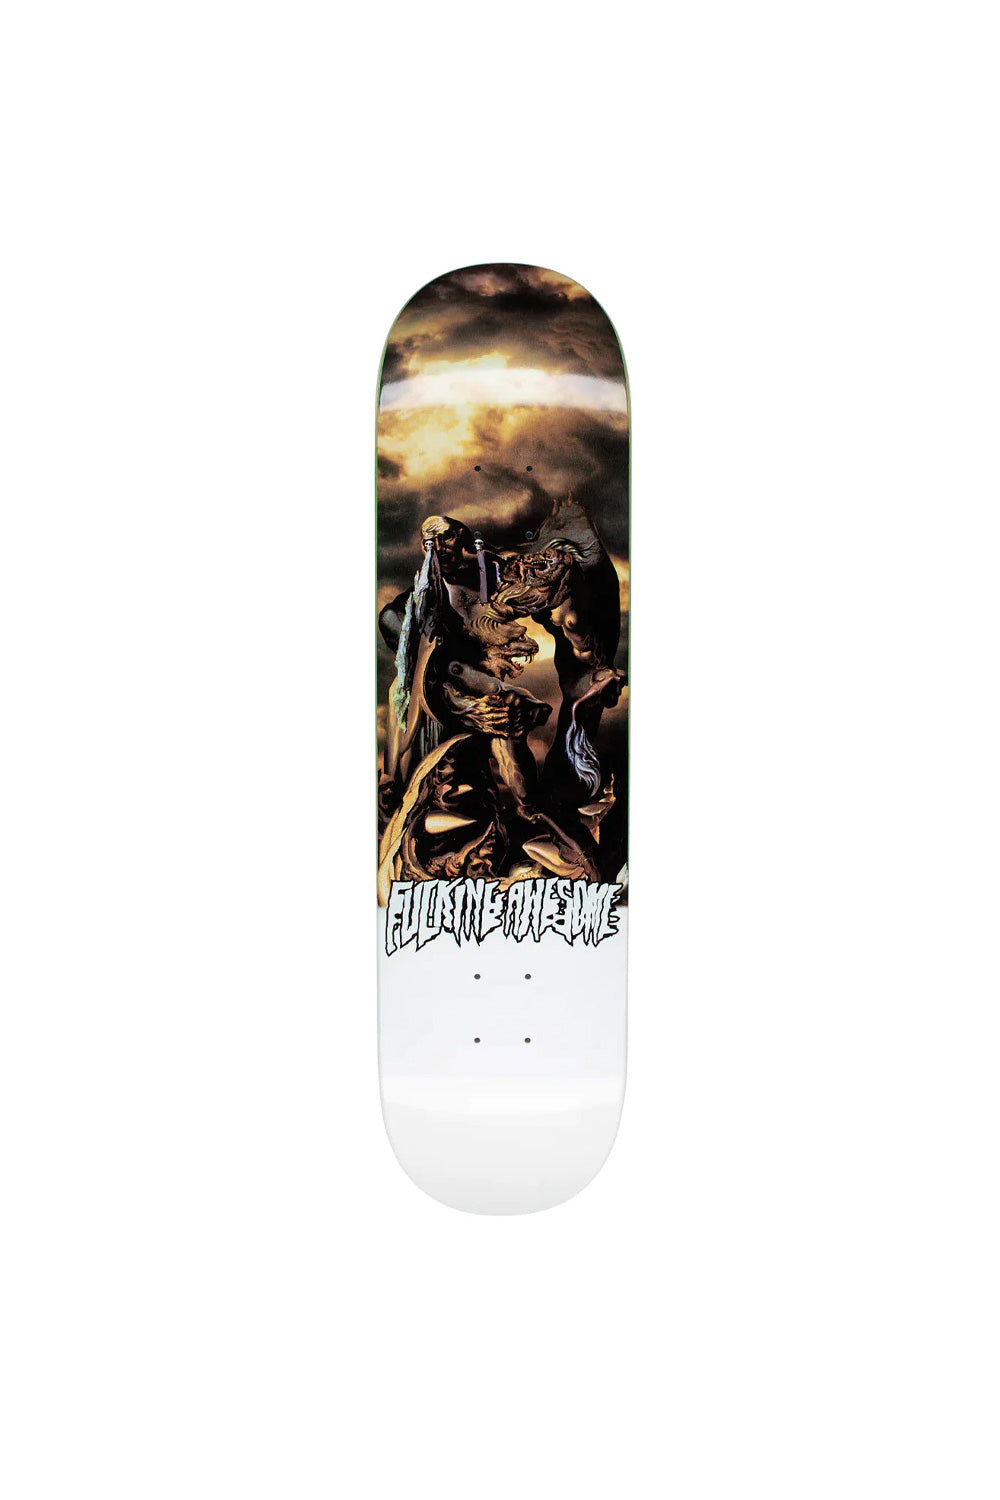 Fucking Awesome Beatrice Domond Dreamania Deck 8,25" - BONKERS